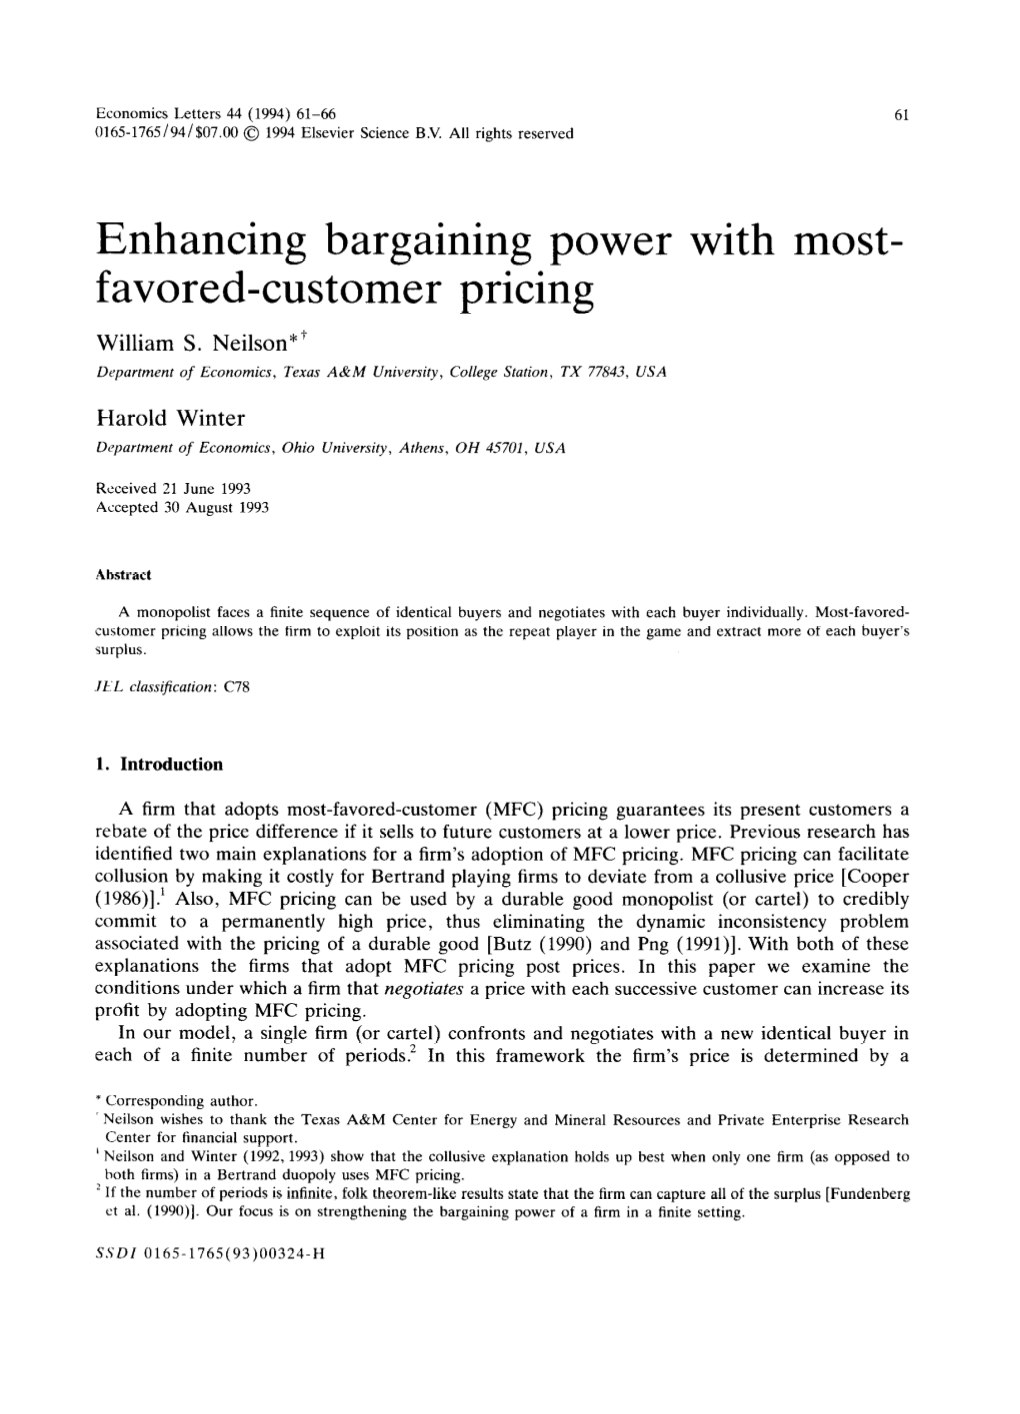 Enhancing Bargaining Power with Most- Favored-Customer Pricing